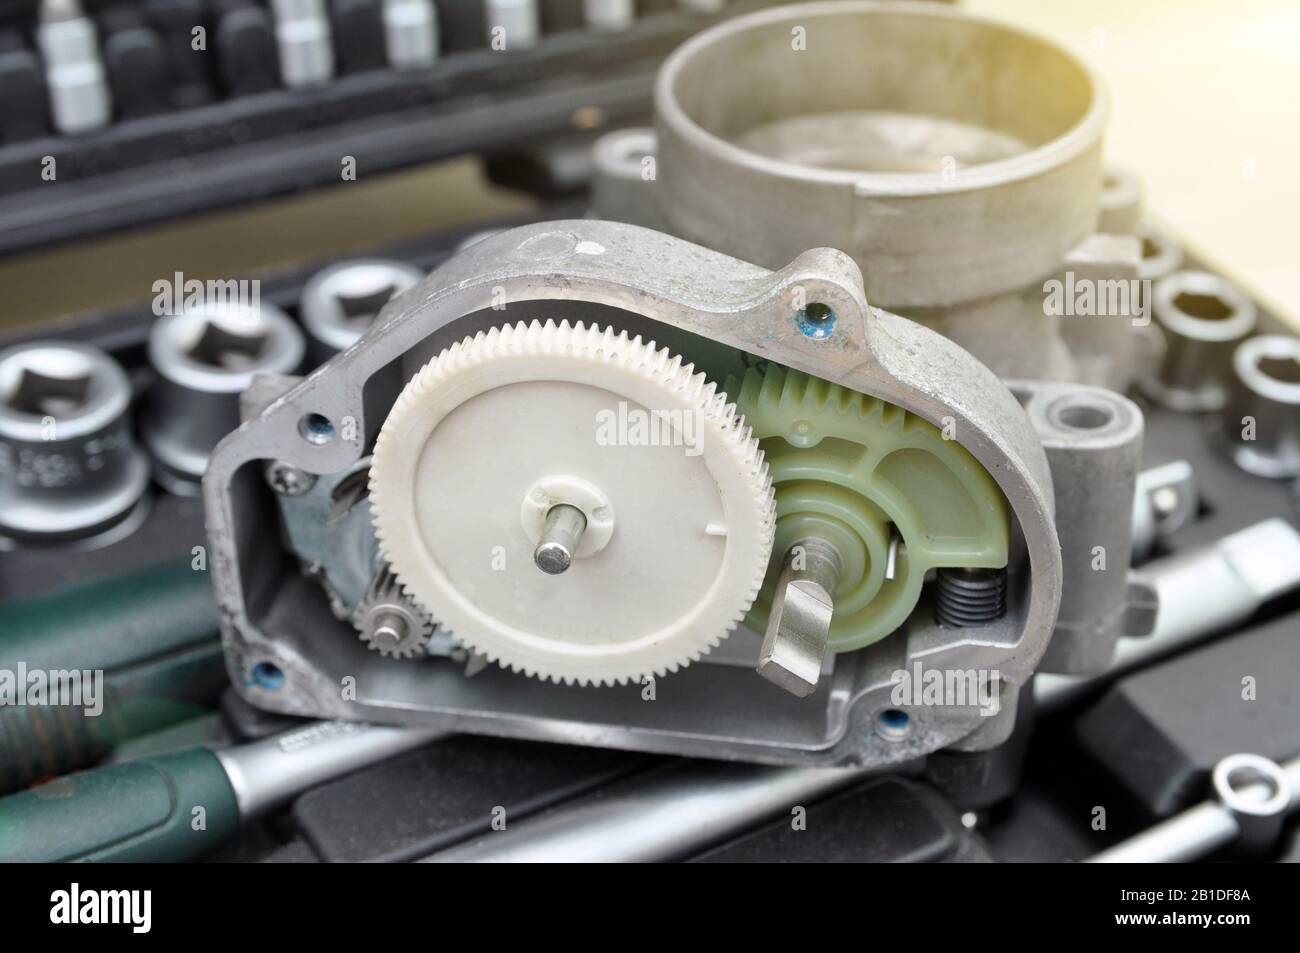 Repair and cleaning the car throttle. Analysis of the throttle on the background of a set of tools for car repair. Gears, mechanism. Stock Photo